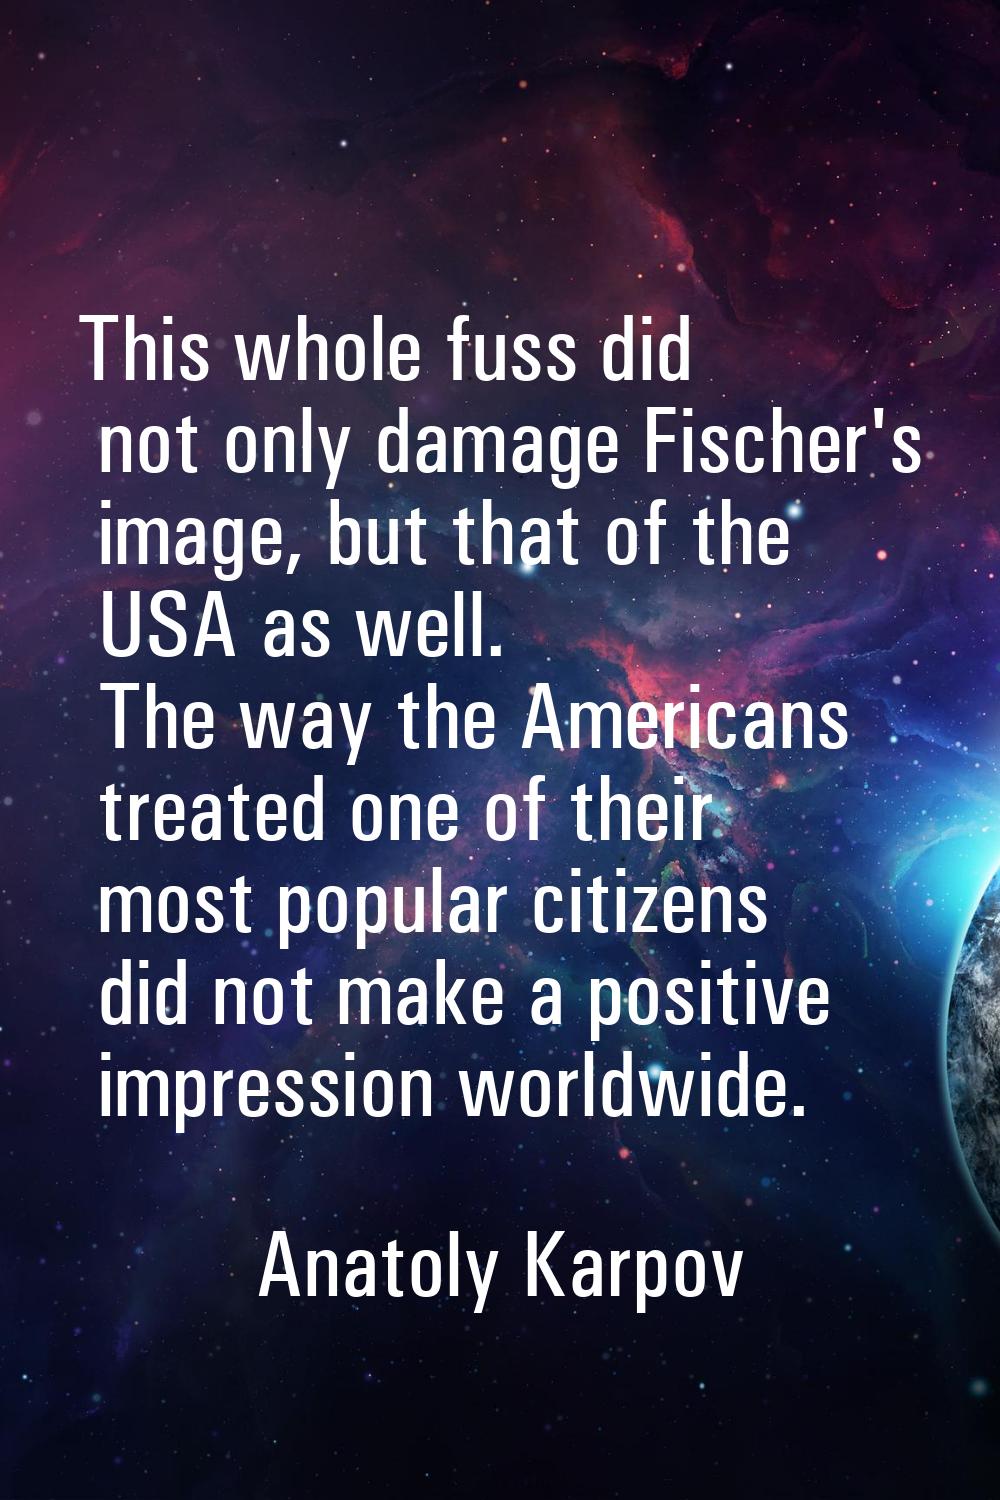 This whole fuss did not only damage Fischer's image, but that of the USA as well. The way the Ameri